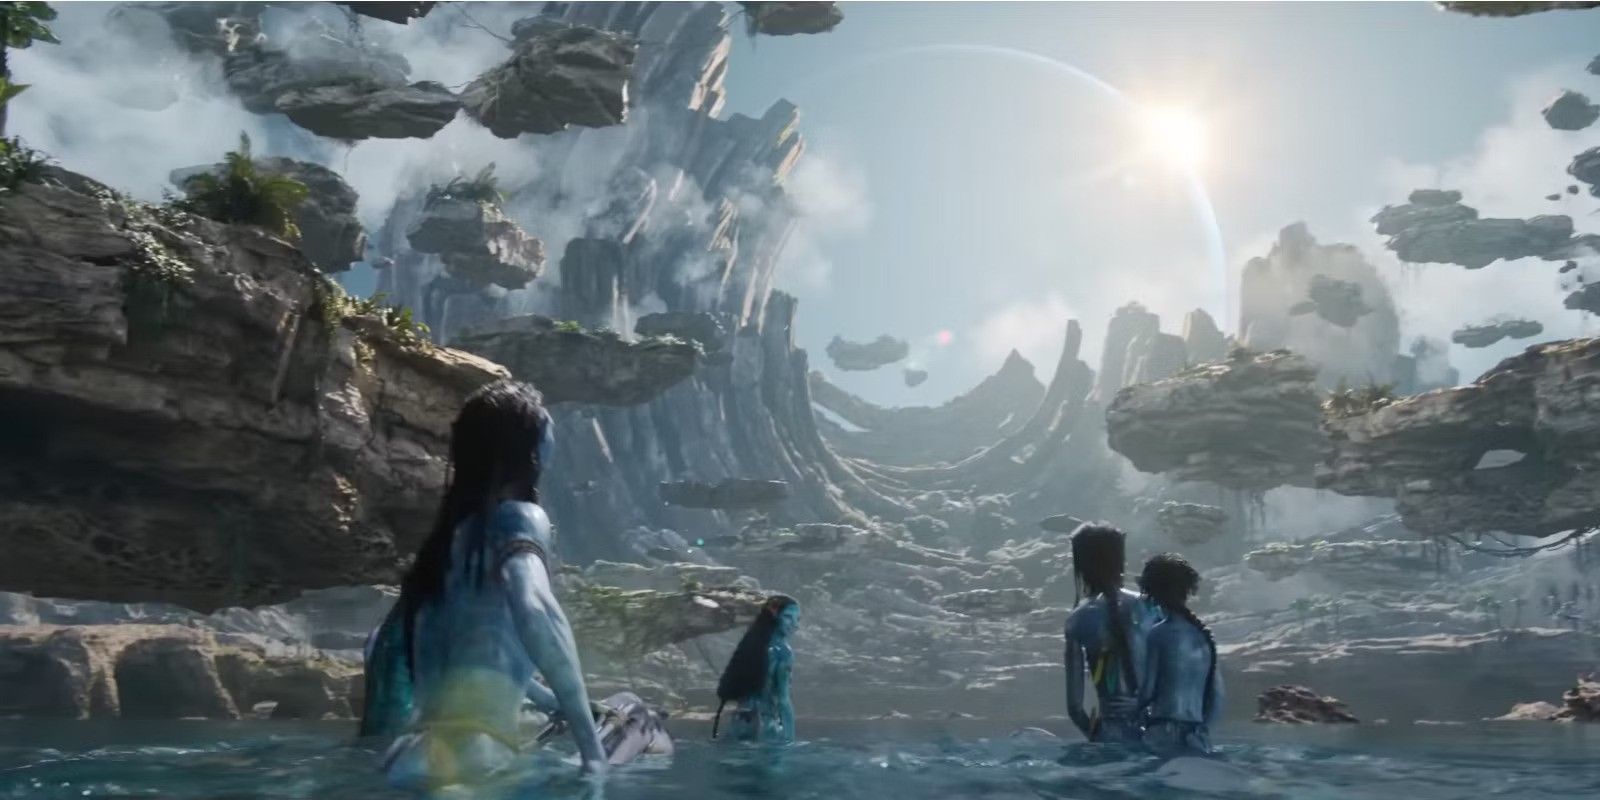 Avatar: The Way of Water relies heavily on VFX for its storytelling.